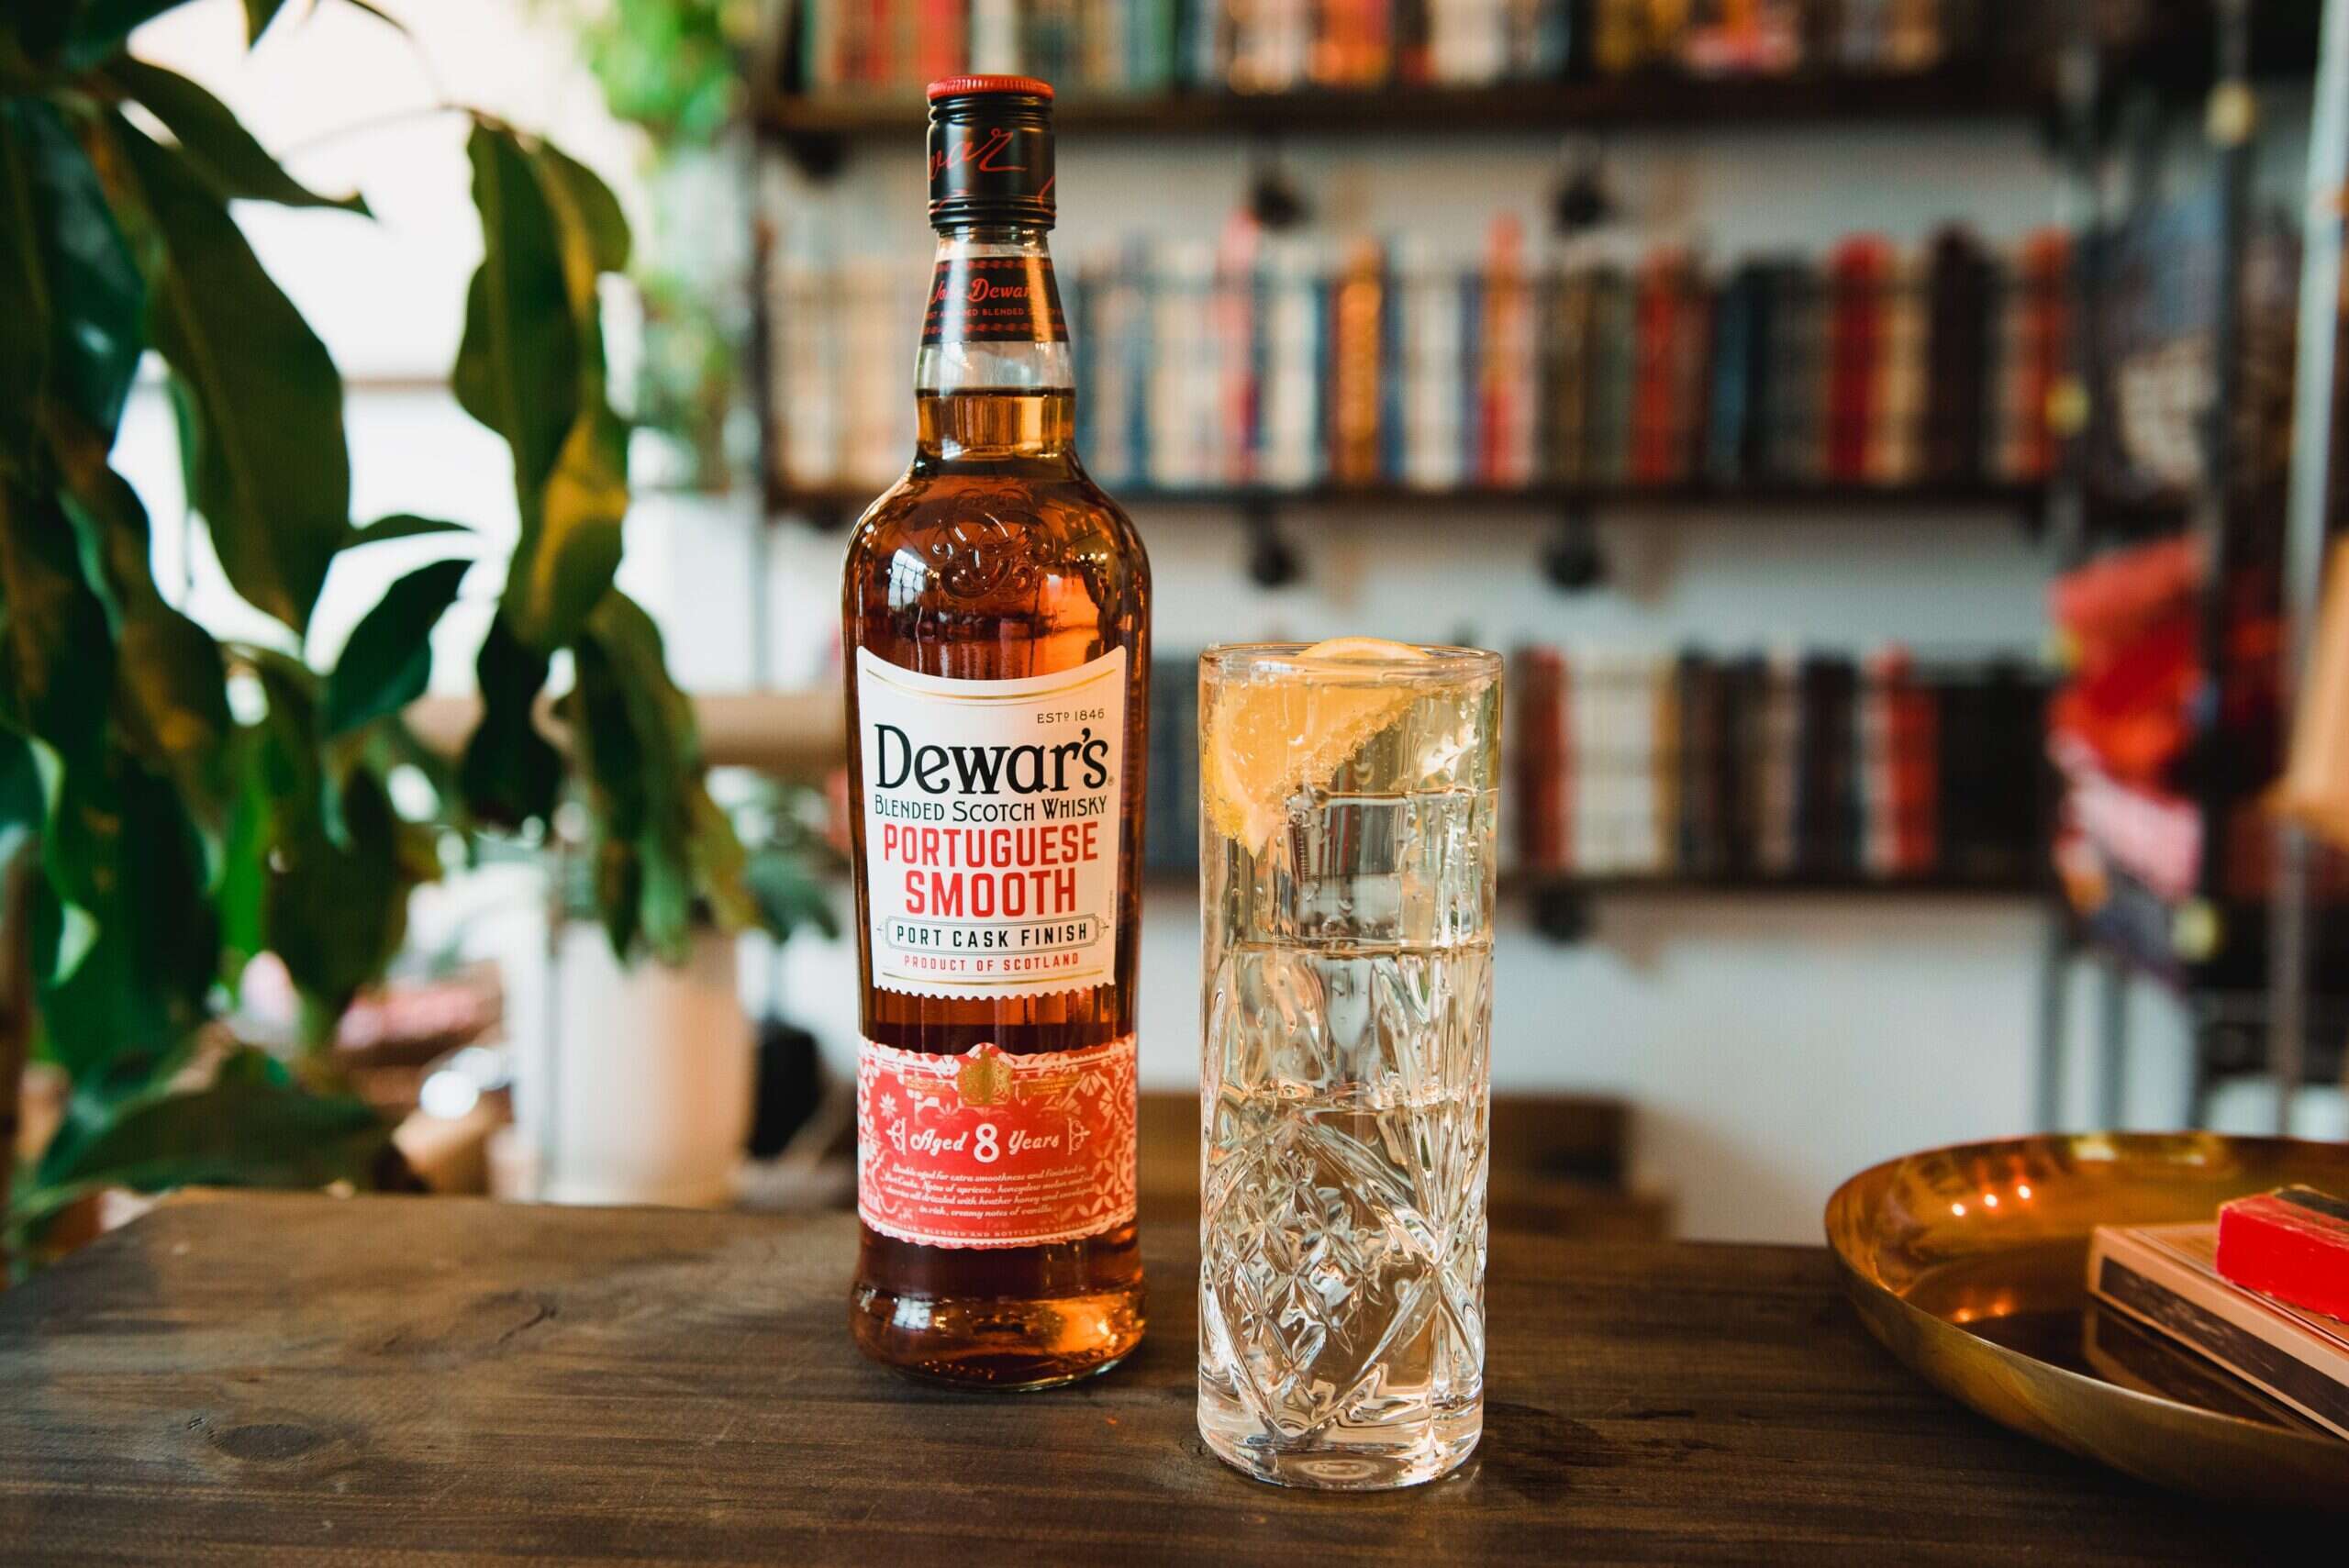 The Spiced Tonic Highball by Dewar’s Portuguese Smooth